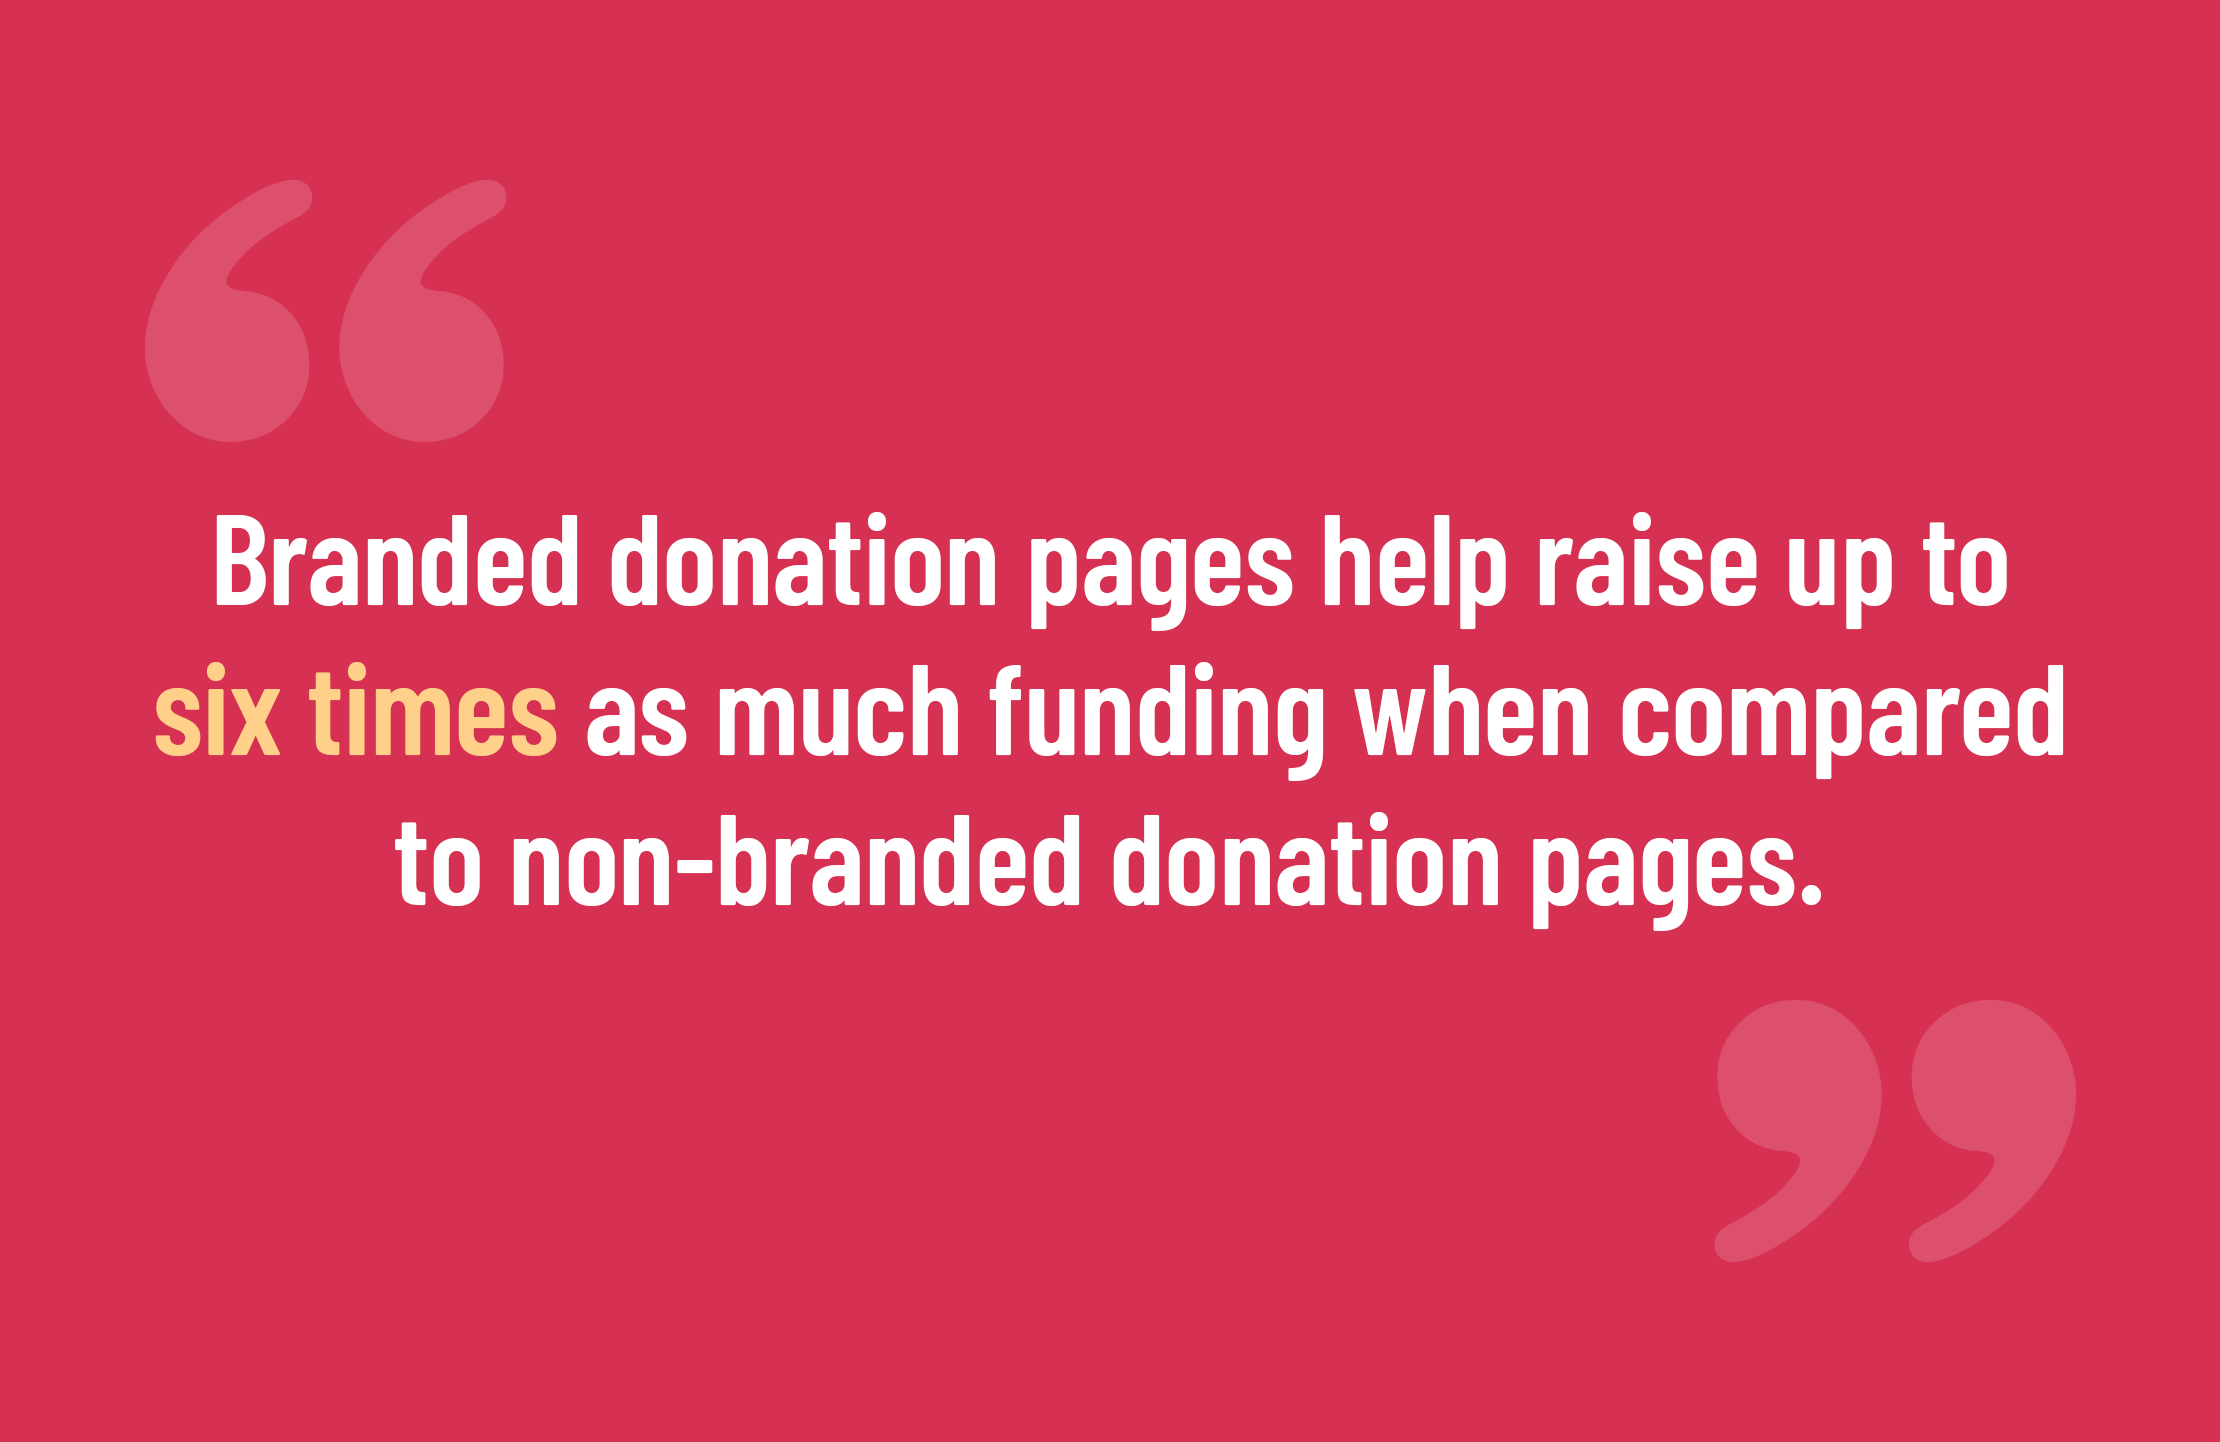 Branded donation pages help raise up to six times as much funding when compared to non-branded donation pages